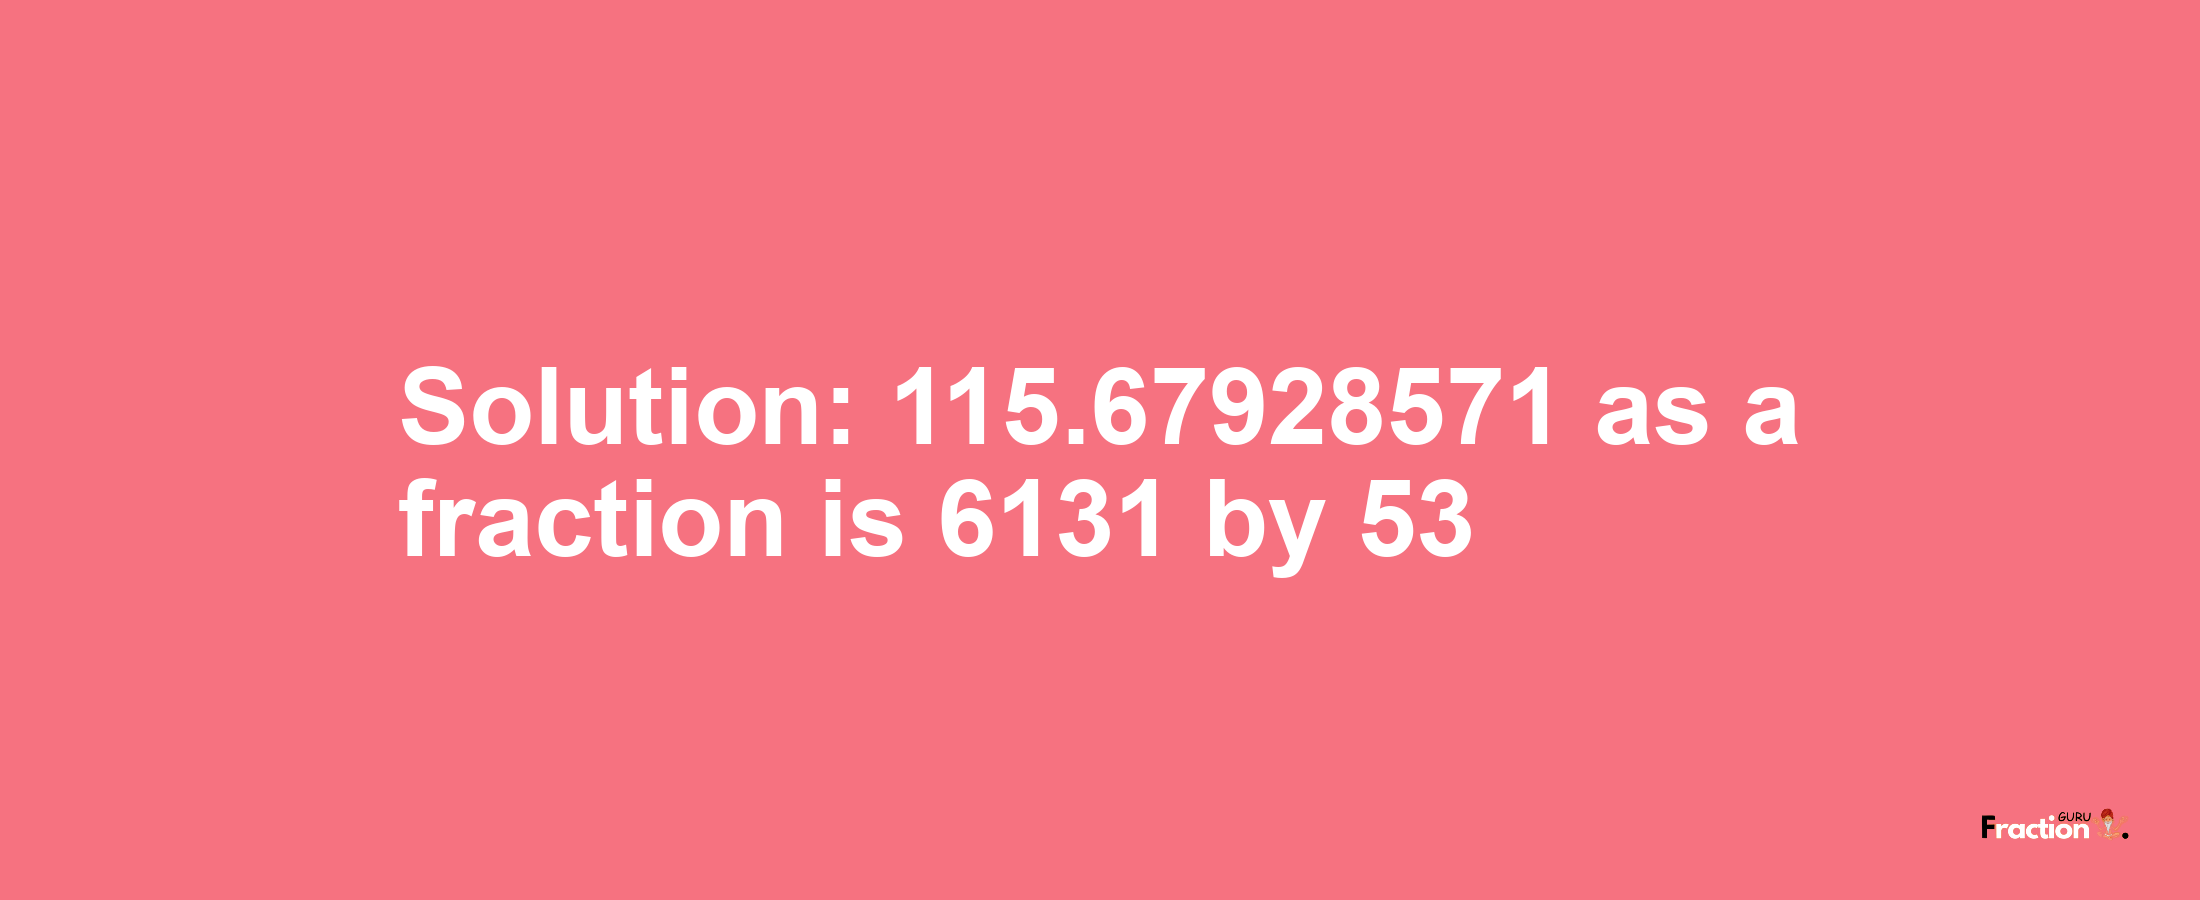 Solution:115.67928571 as a fraction is 6131/53